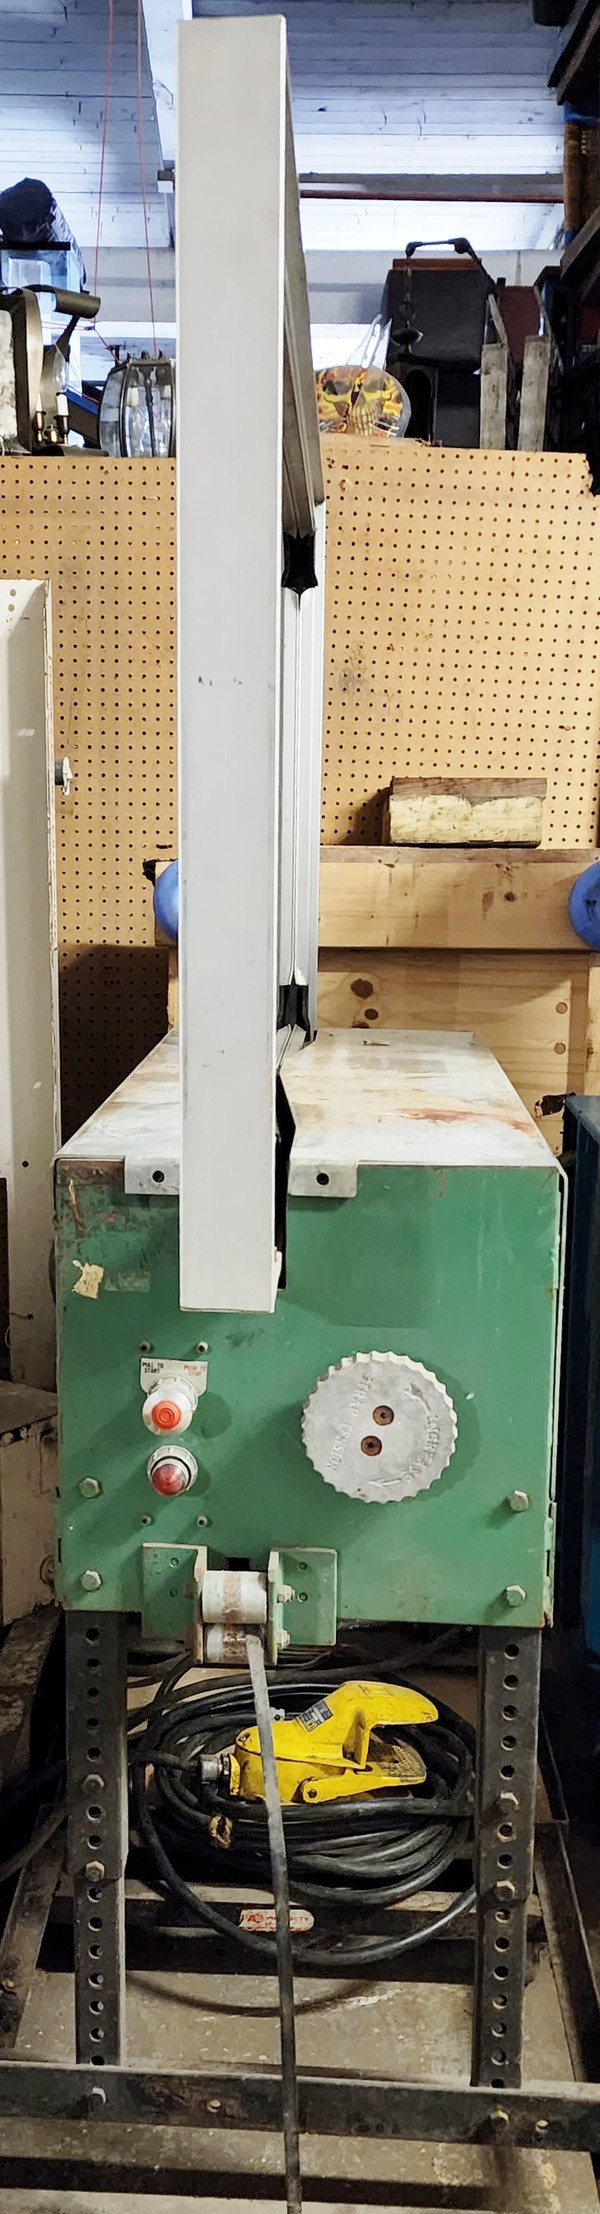 2 CARTON STRAPPING MACHINES, SIGNODE MCD 700, 3/8" plastic, For Repair or Parts